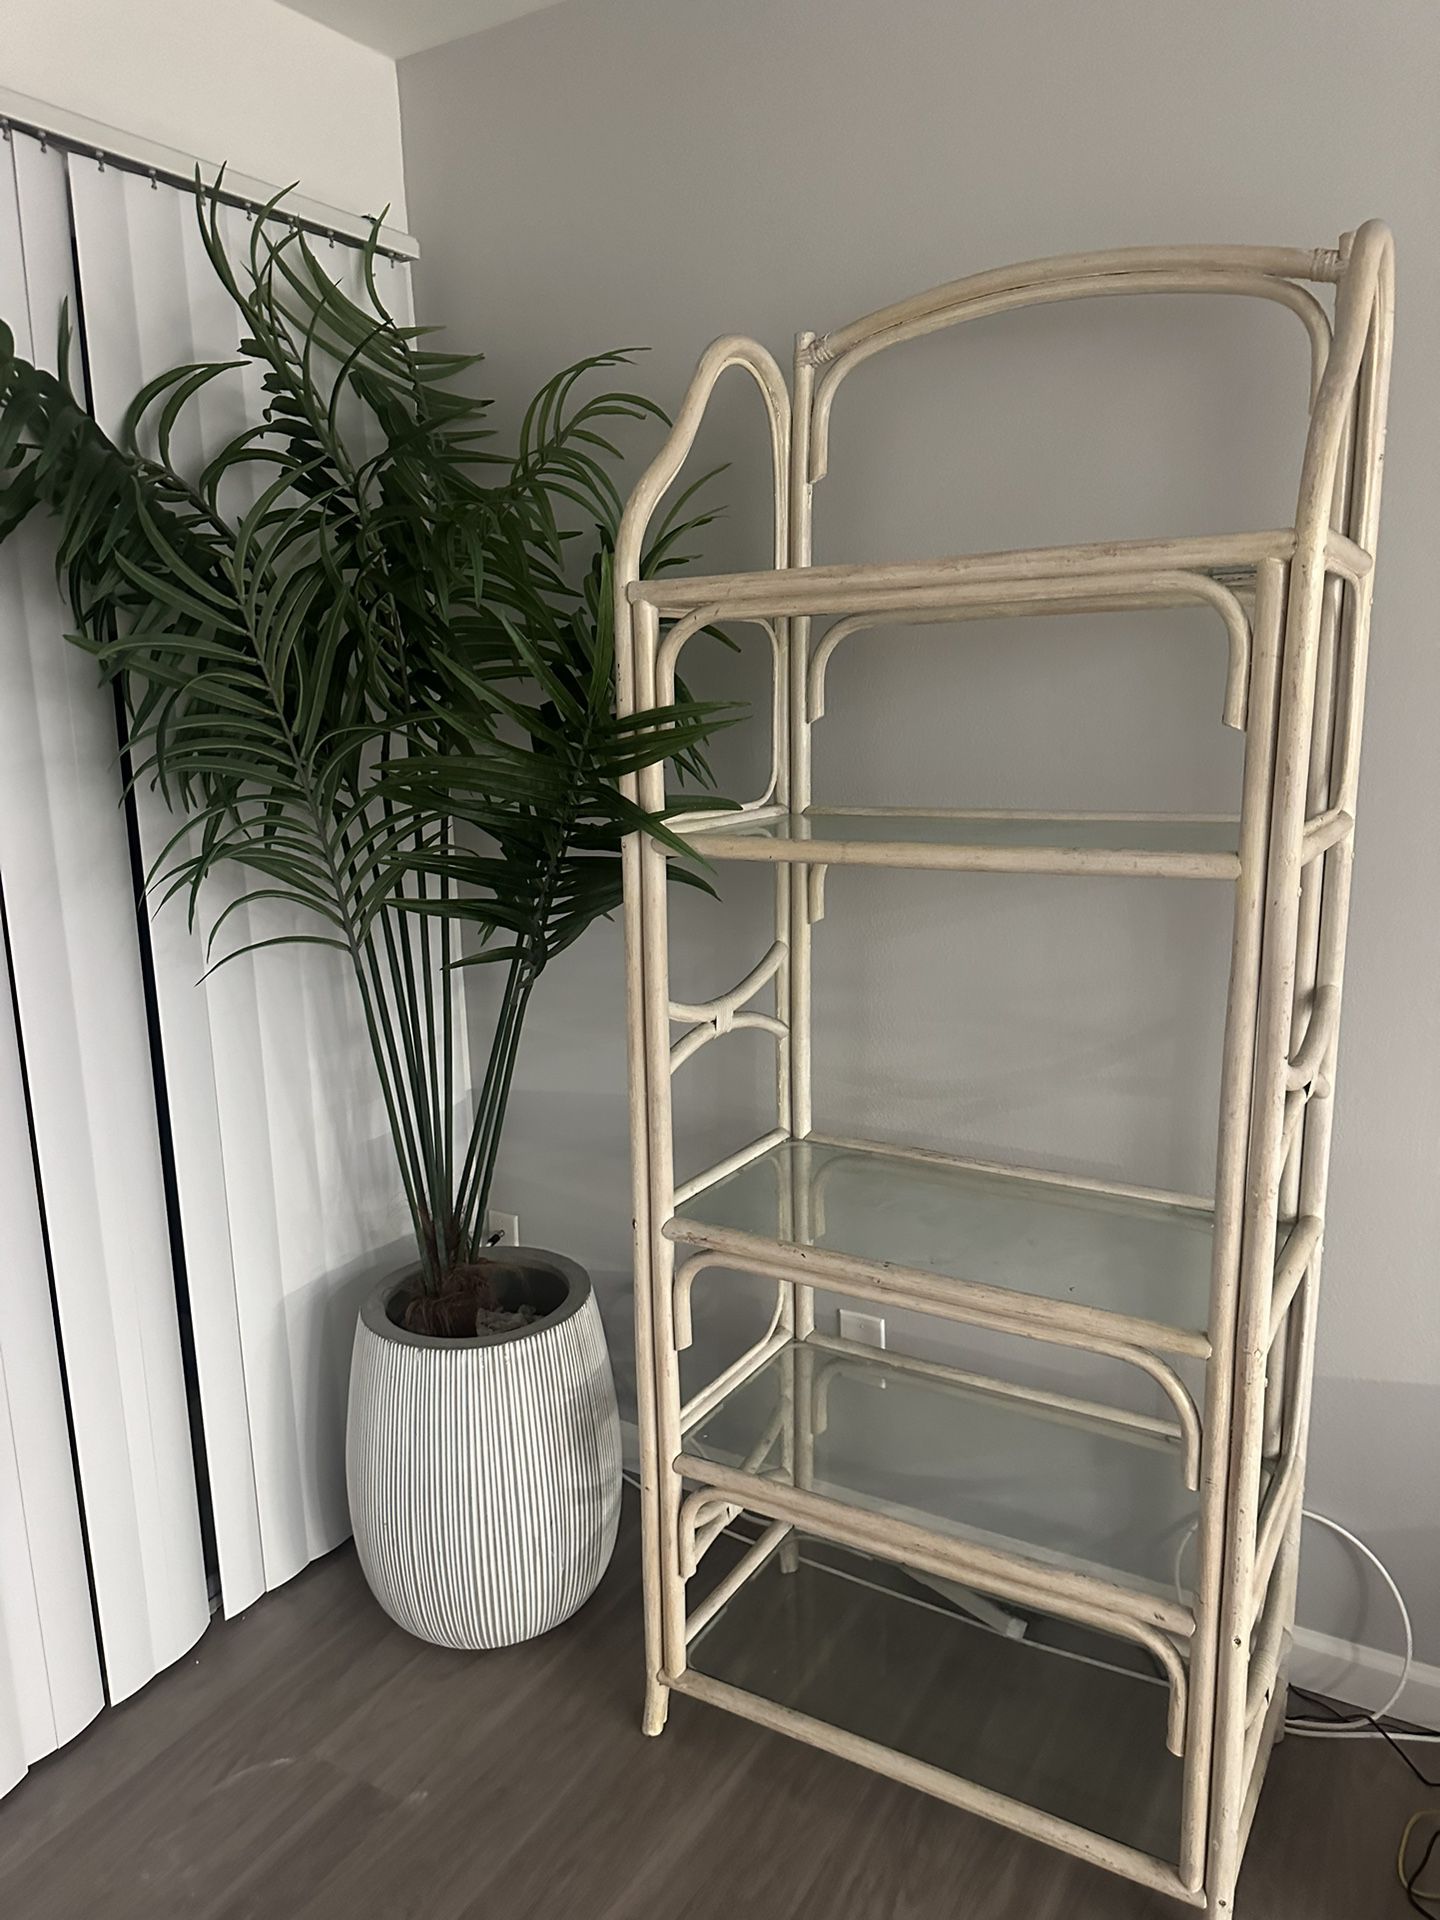 5 Piece Bamboo Shelf And Plant